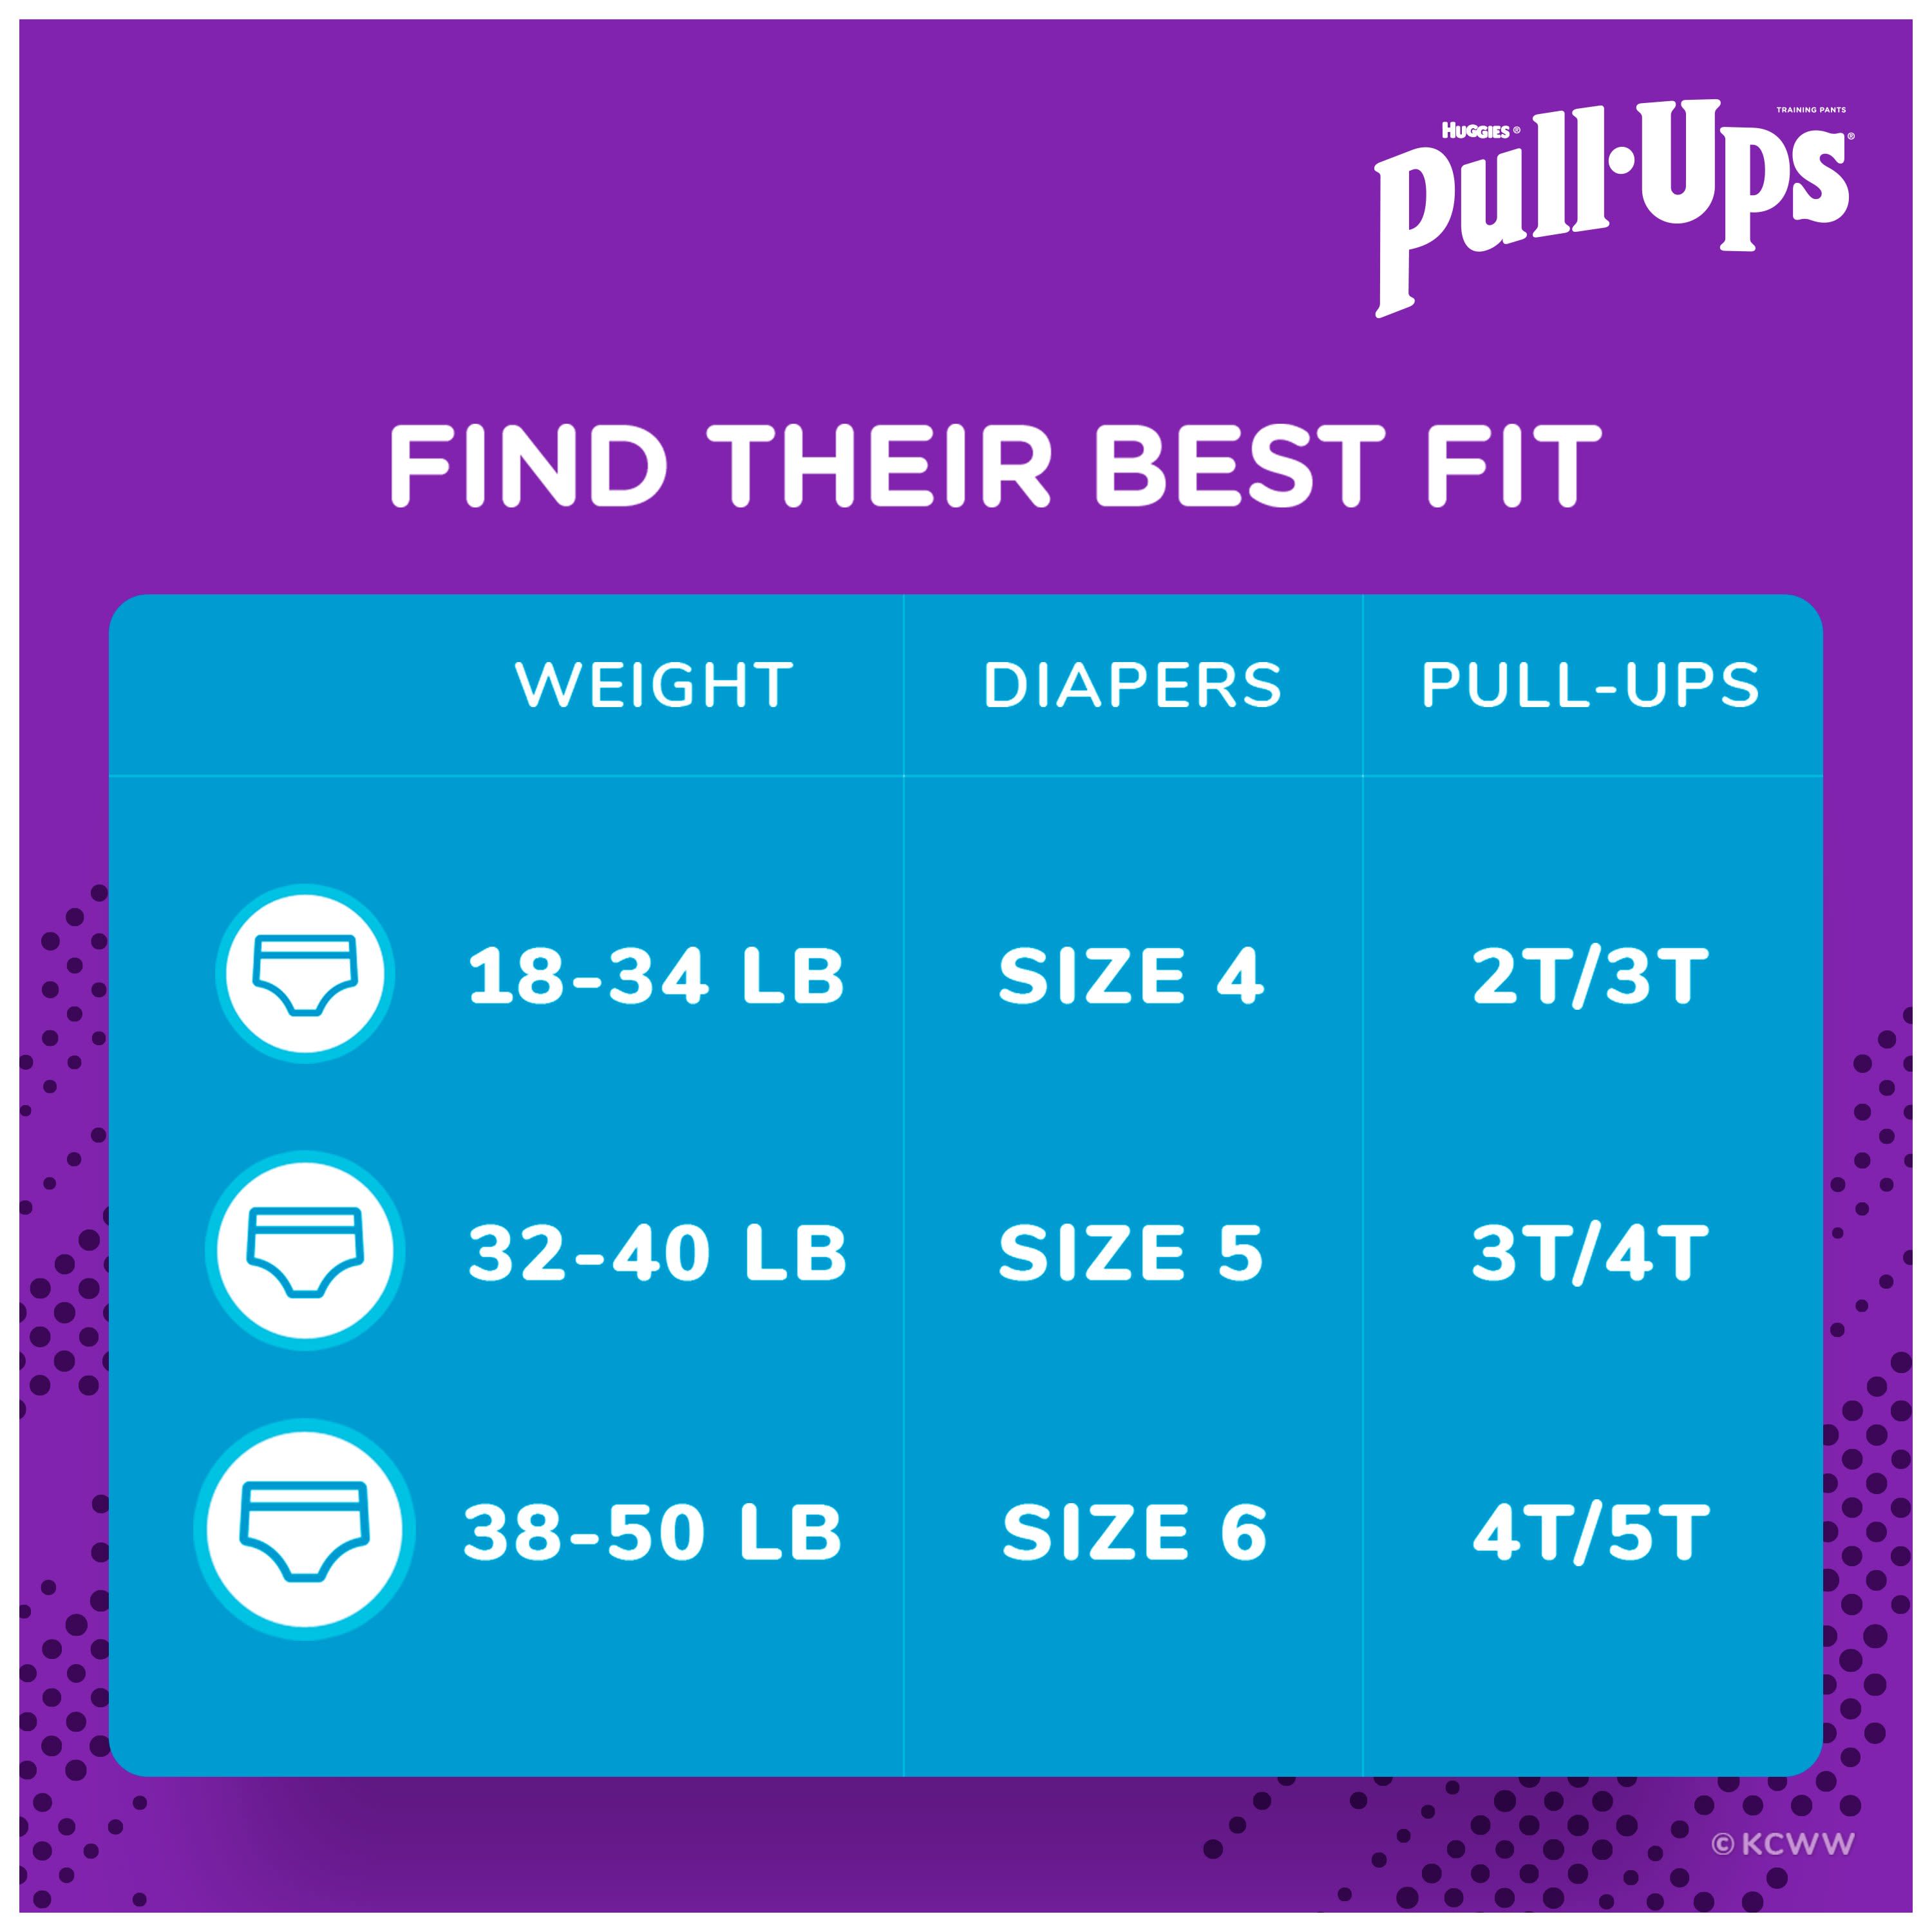 Pull-Ups Boys' Potty Training Pants Size 4, 2T-3T, 74 Ct - image 4 of 9